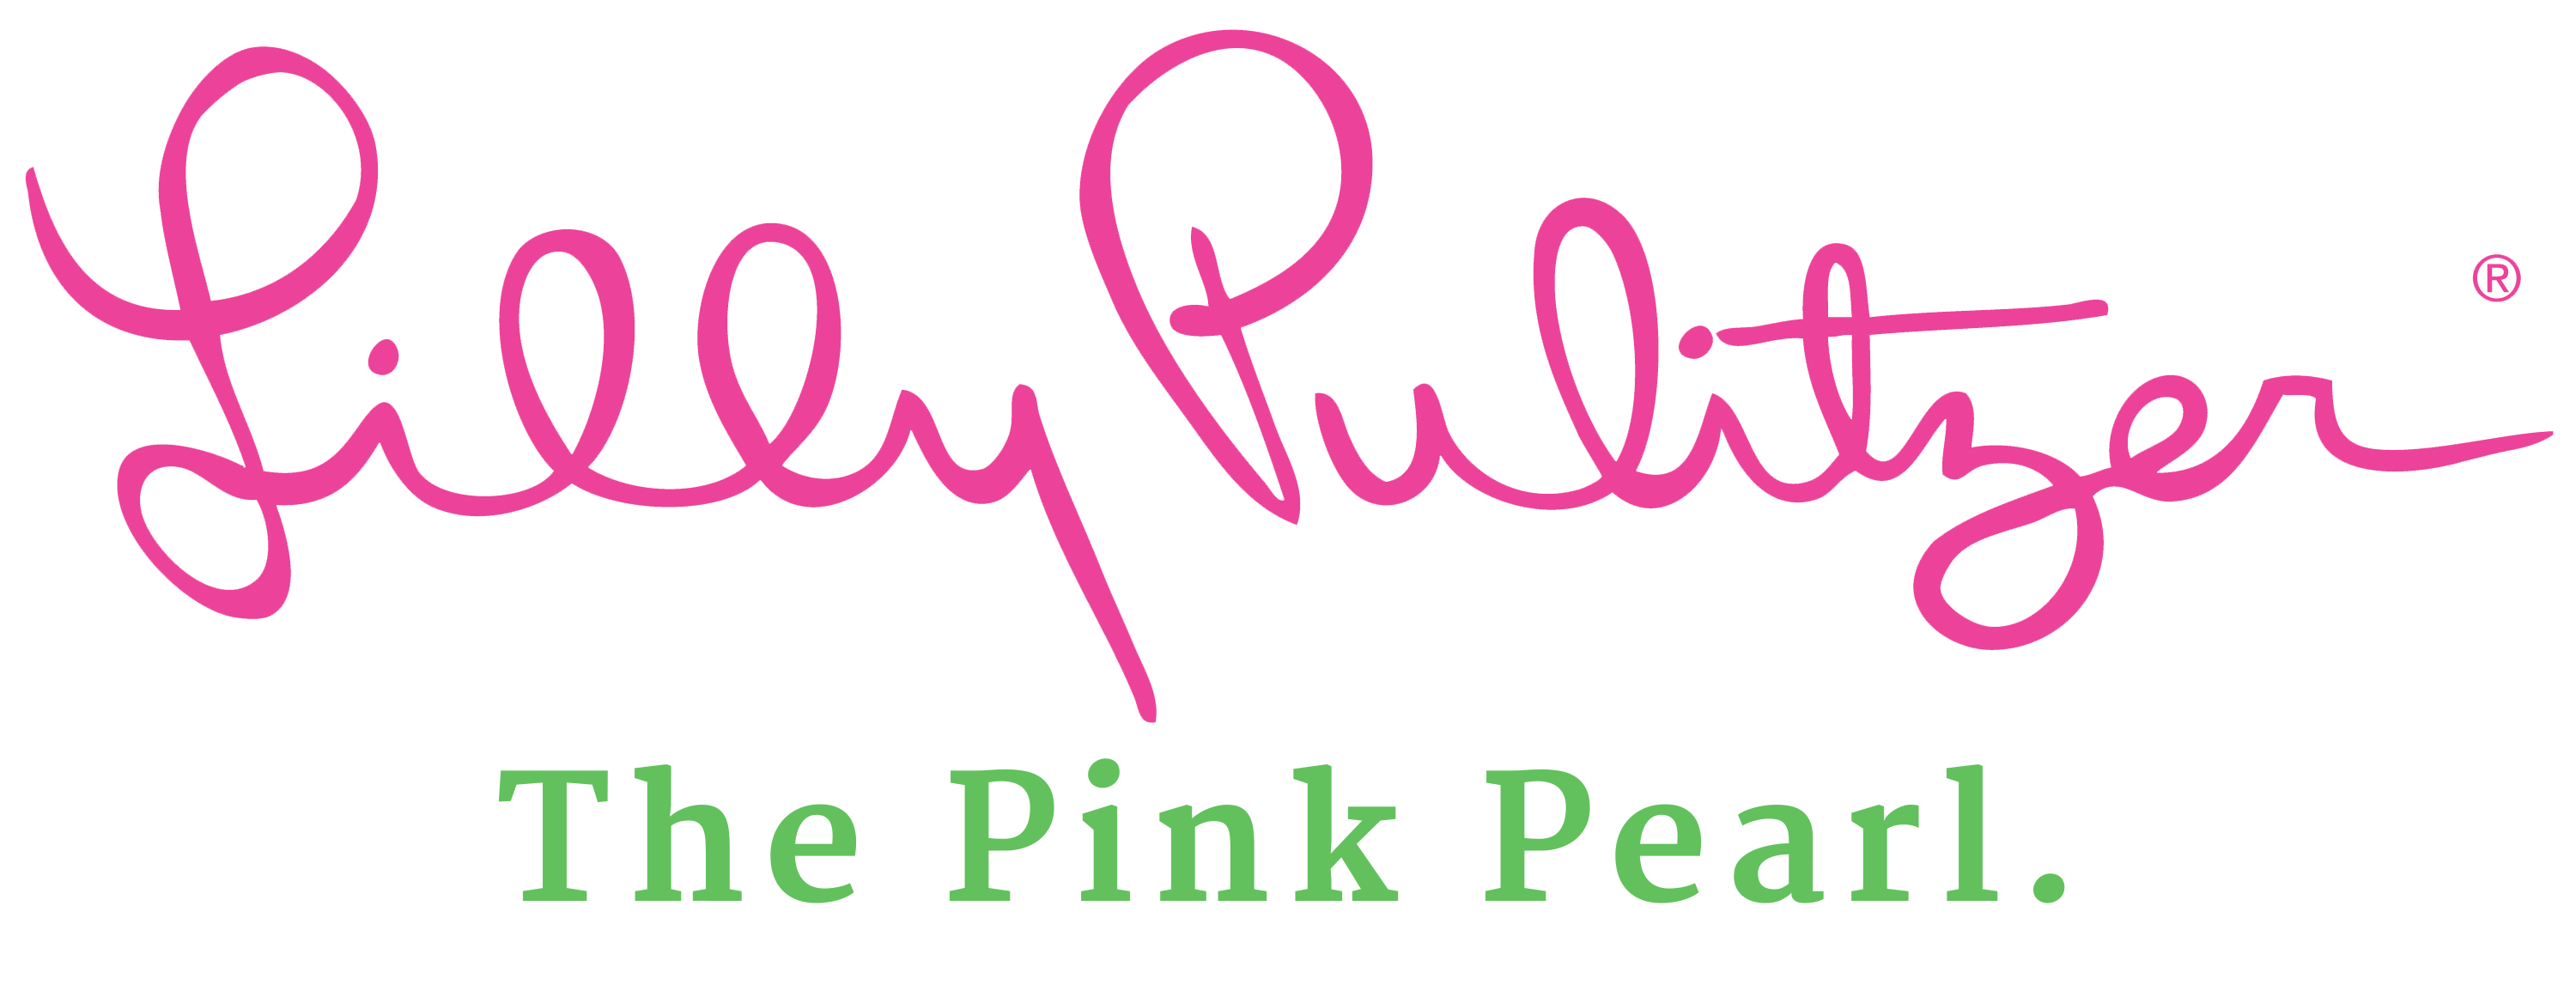 Lilly Pulitzer Logo - Lilly-Pulitzer-Logo - Eastgate Crossing : Eastgate Crossing